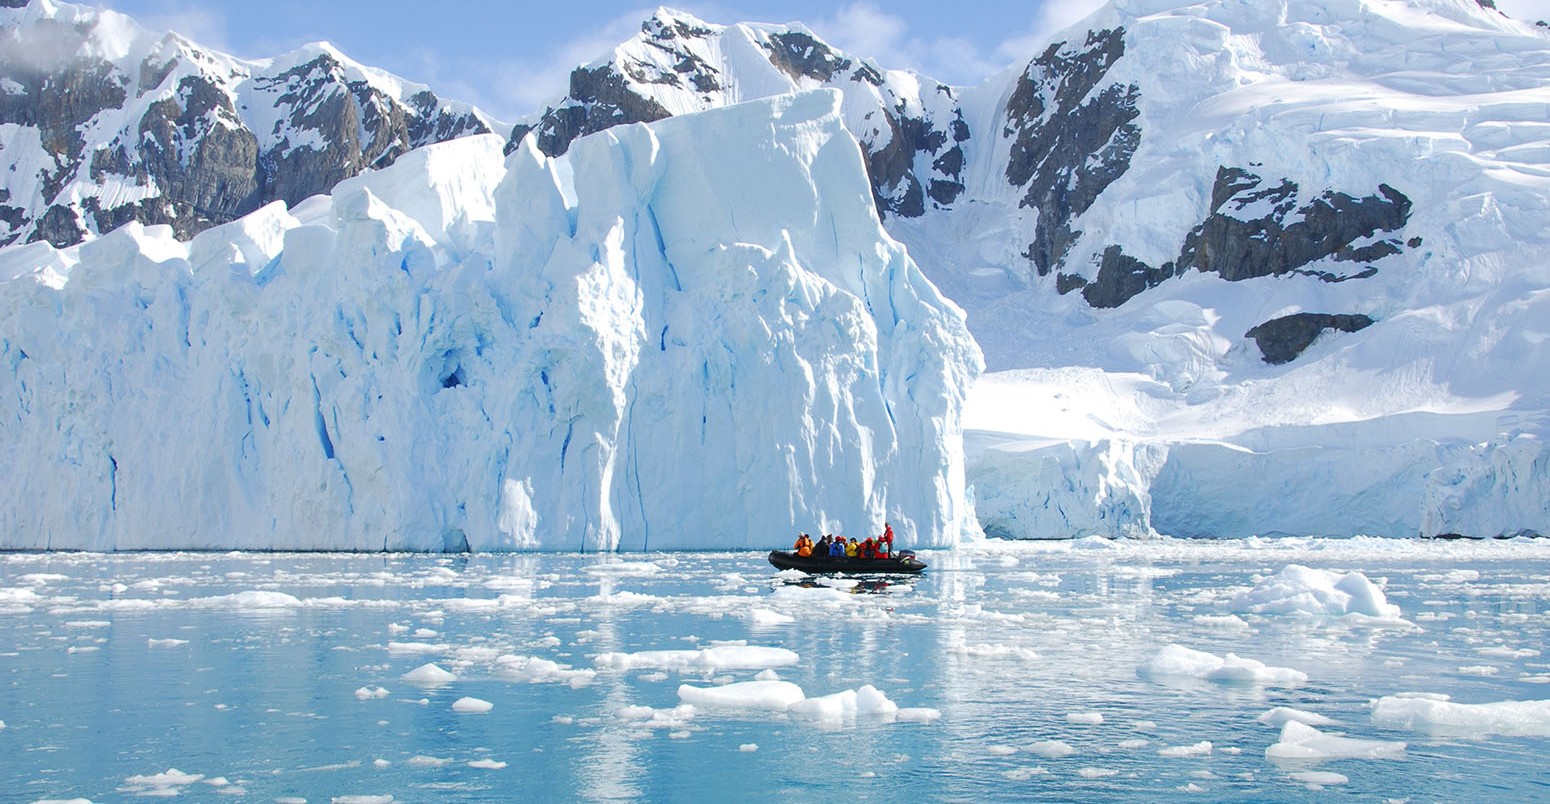 Iceberg off the coast of Antarctica with people in a boat